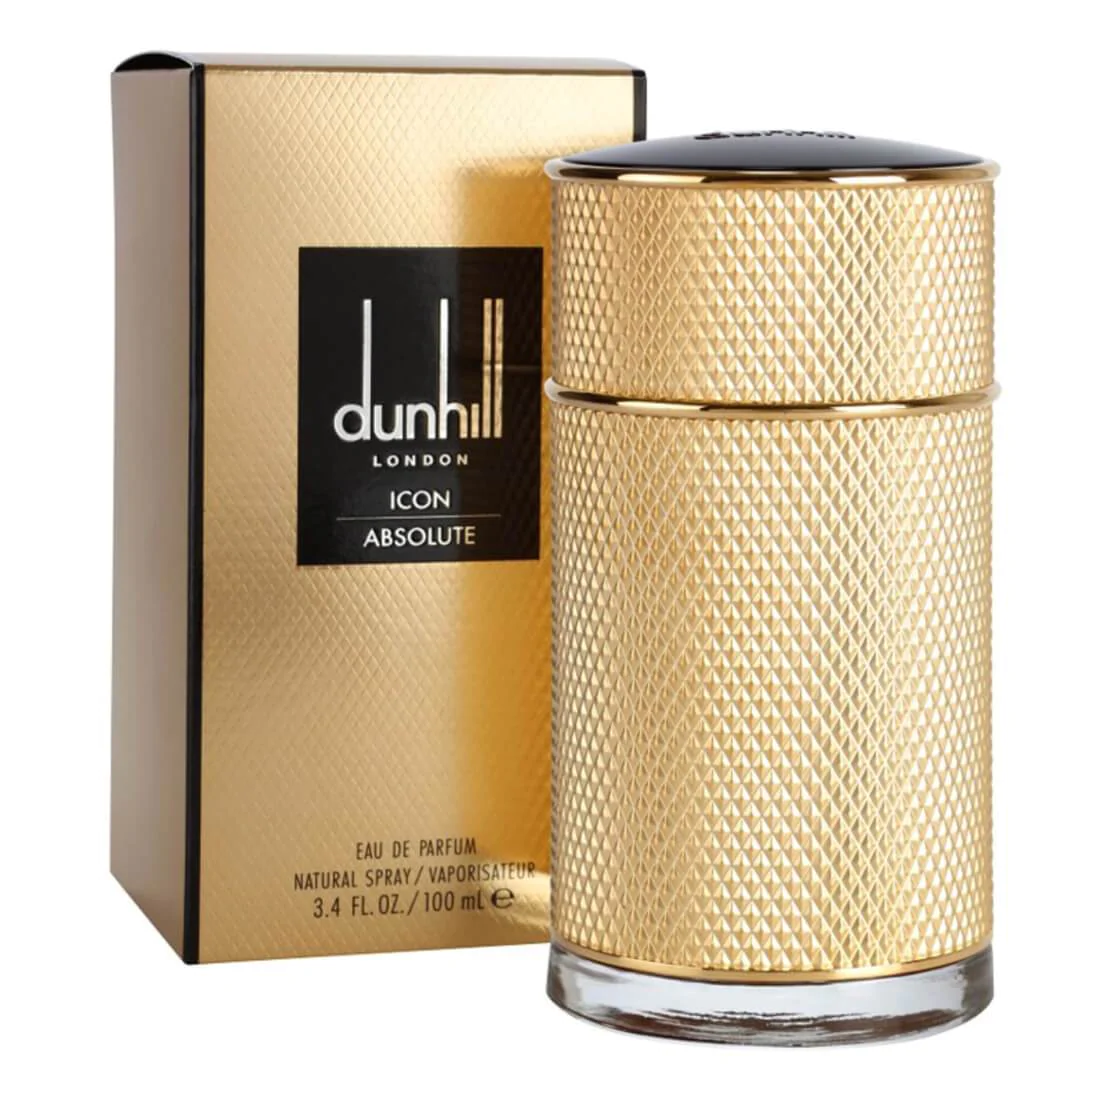 Dunhill London Icon Absolute 100ml EDP Spray